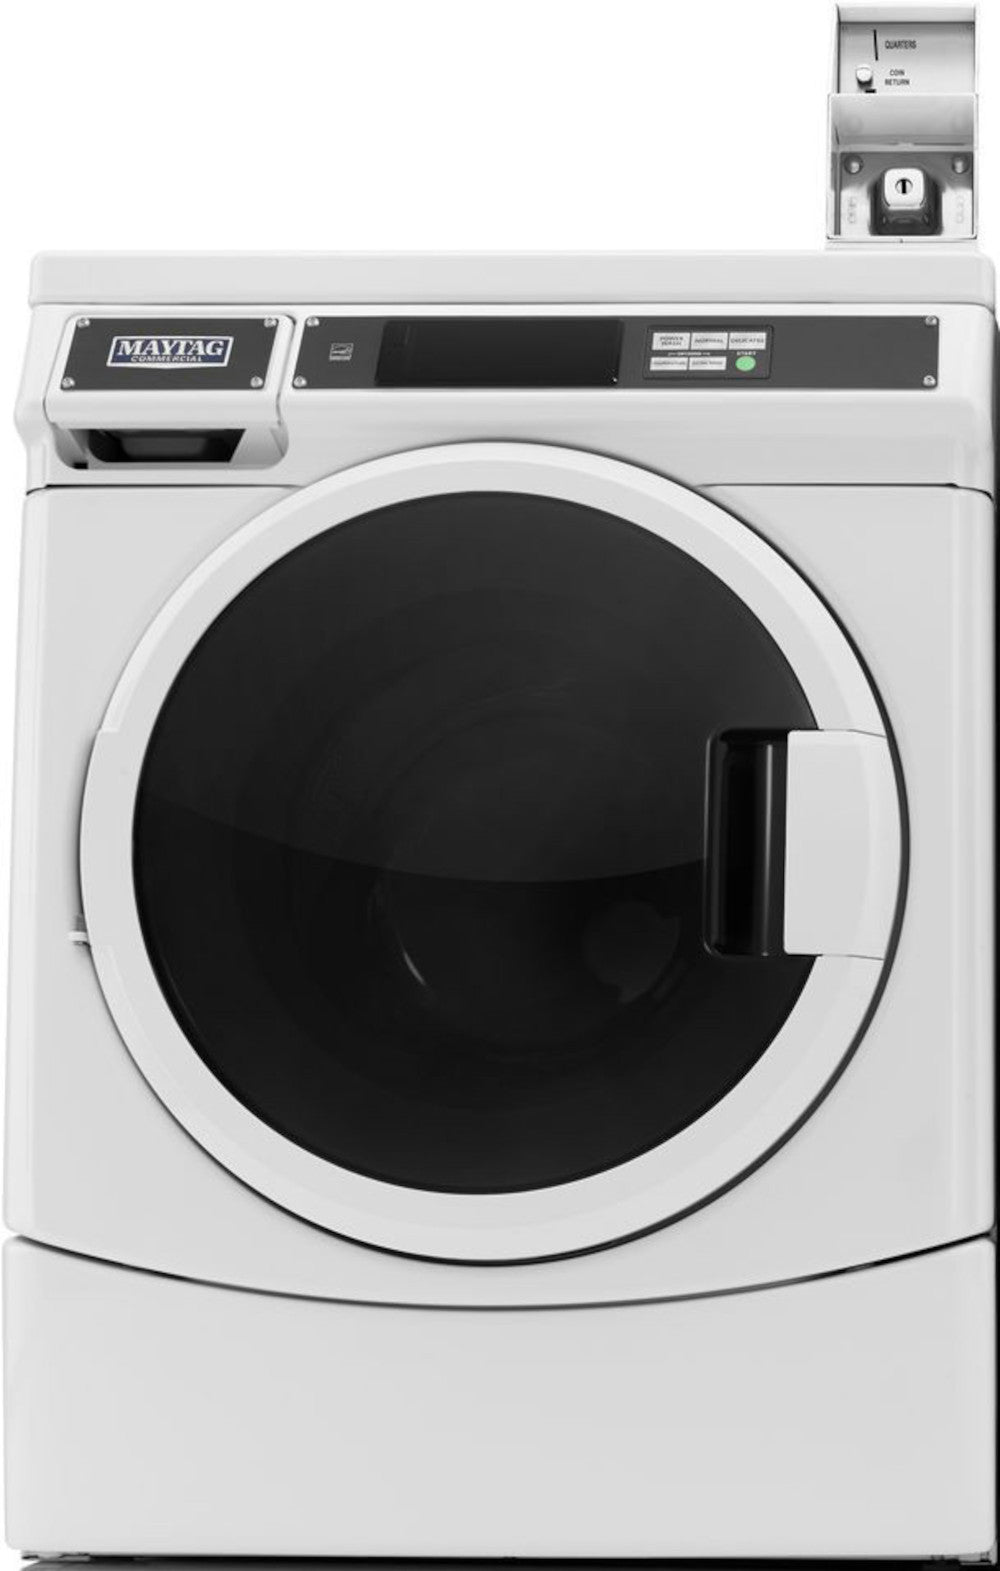 Maytag - 3.1 cu. Ft  Front Load Washer in White - MHN33PDCXW